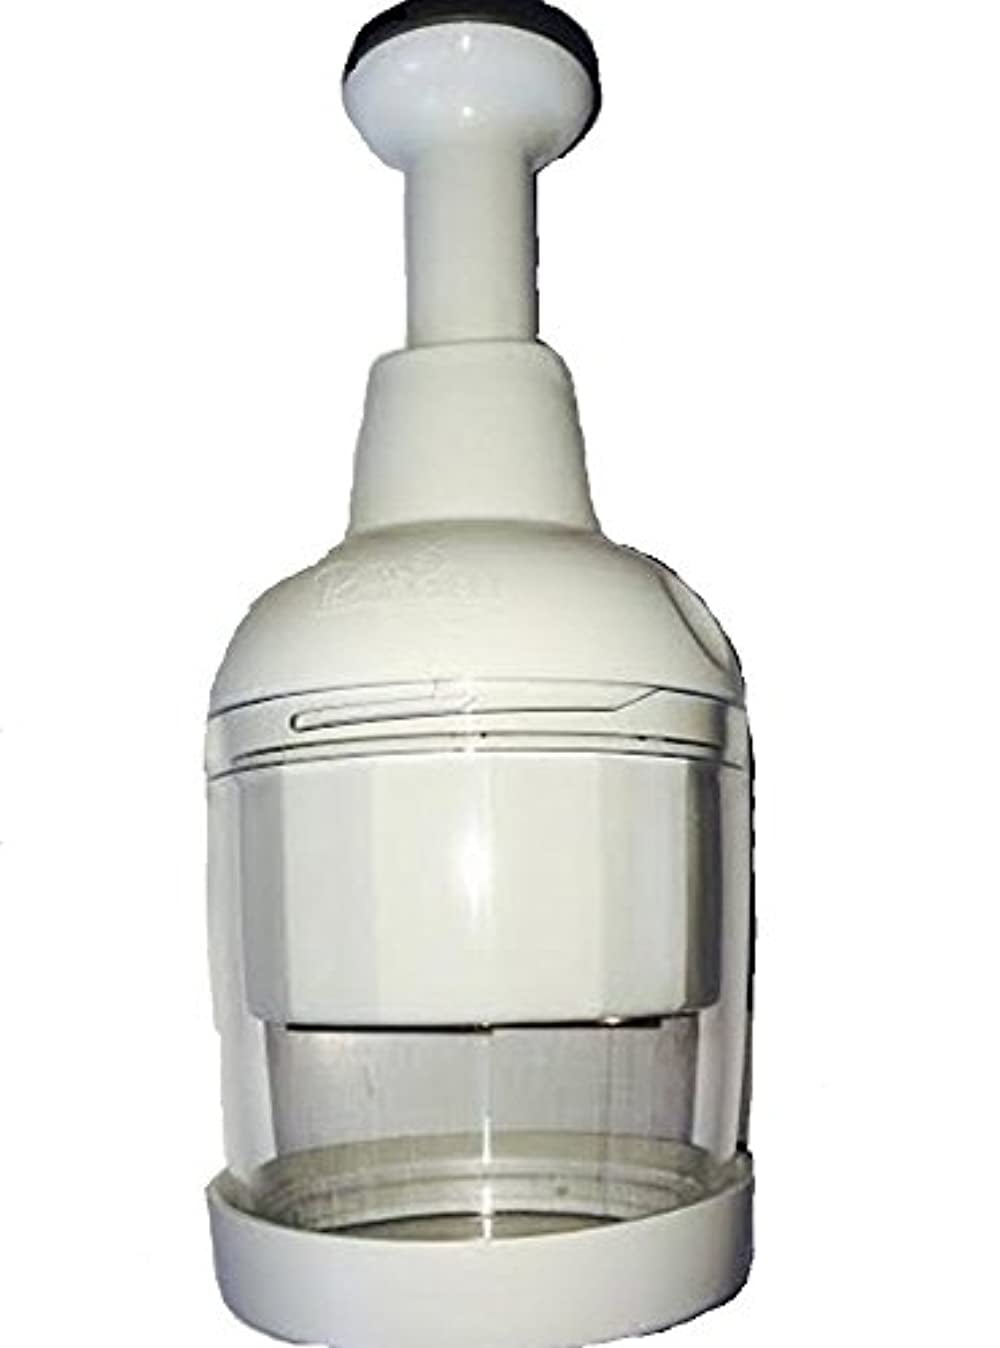 Buy The Pampered Chef Food Chopper (#2585)-White Online at